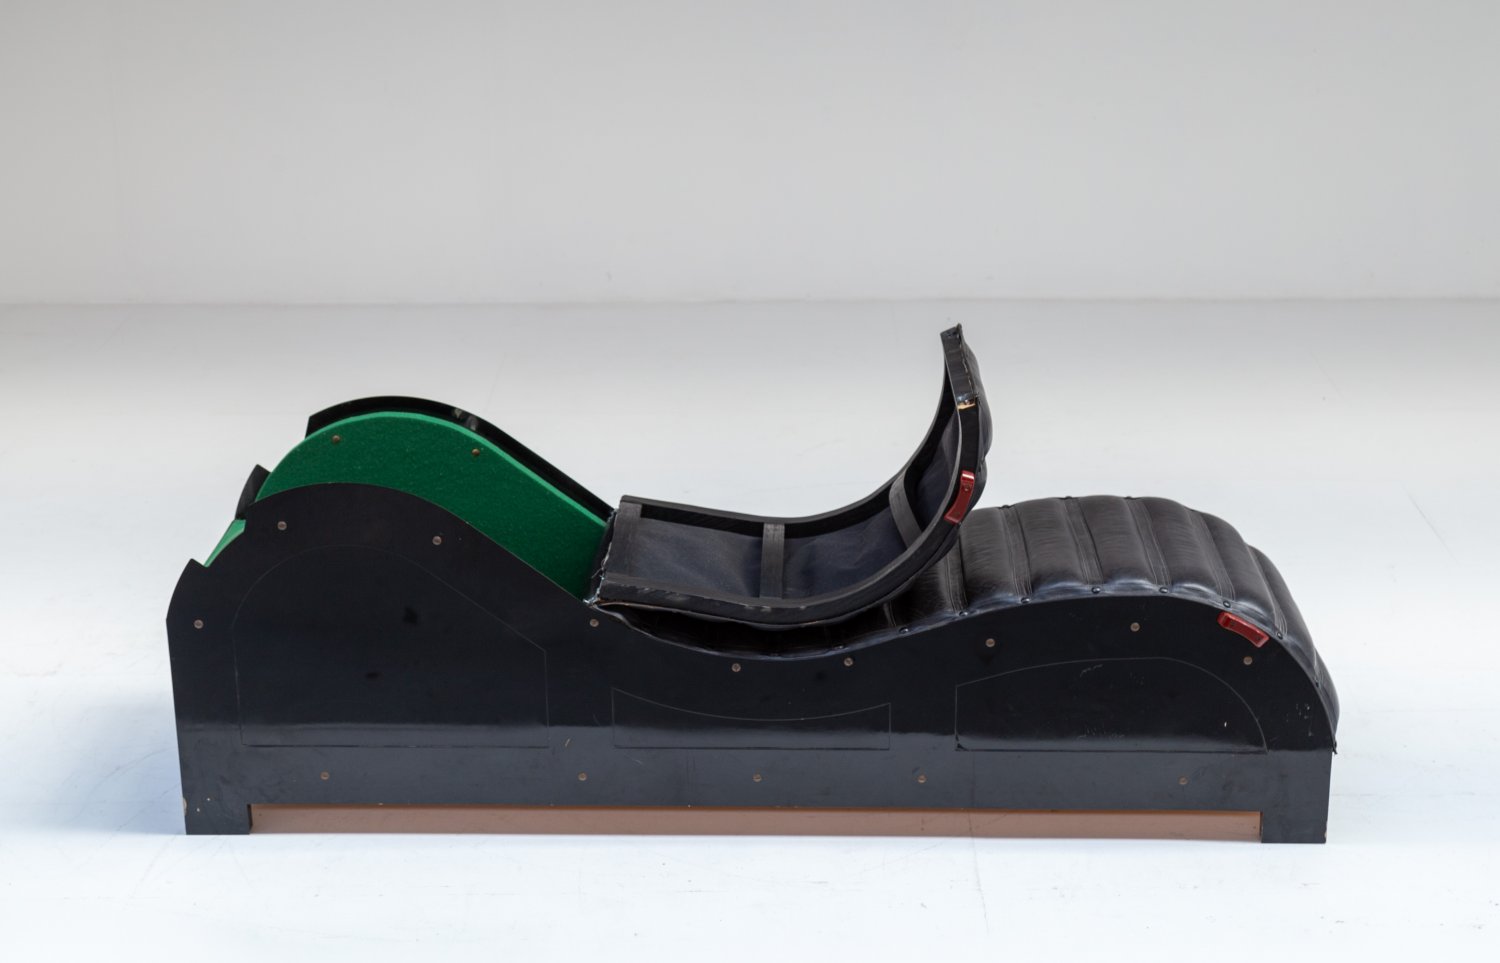 Mats Theselius 'Chaise Longue' 1992